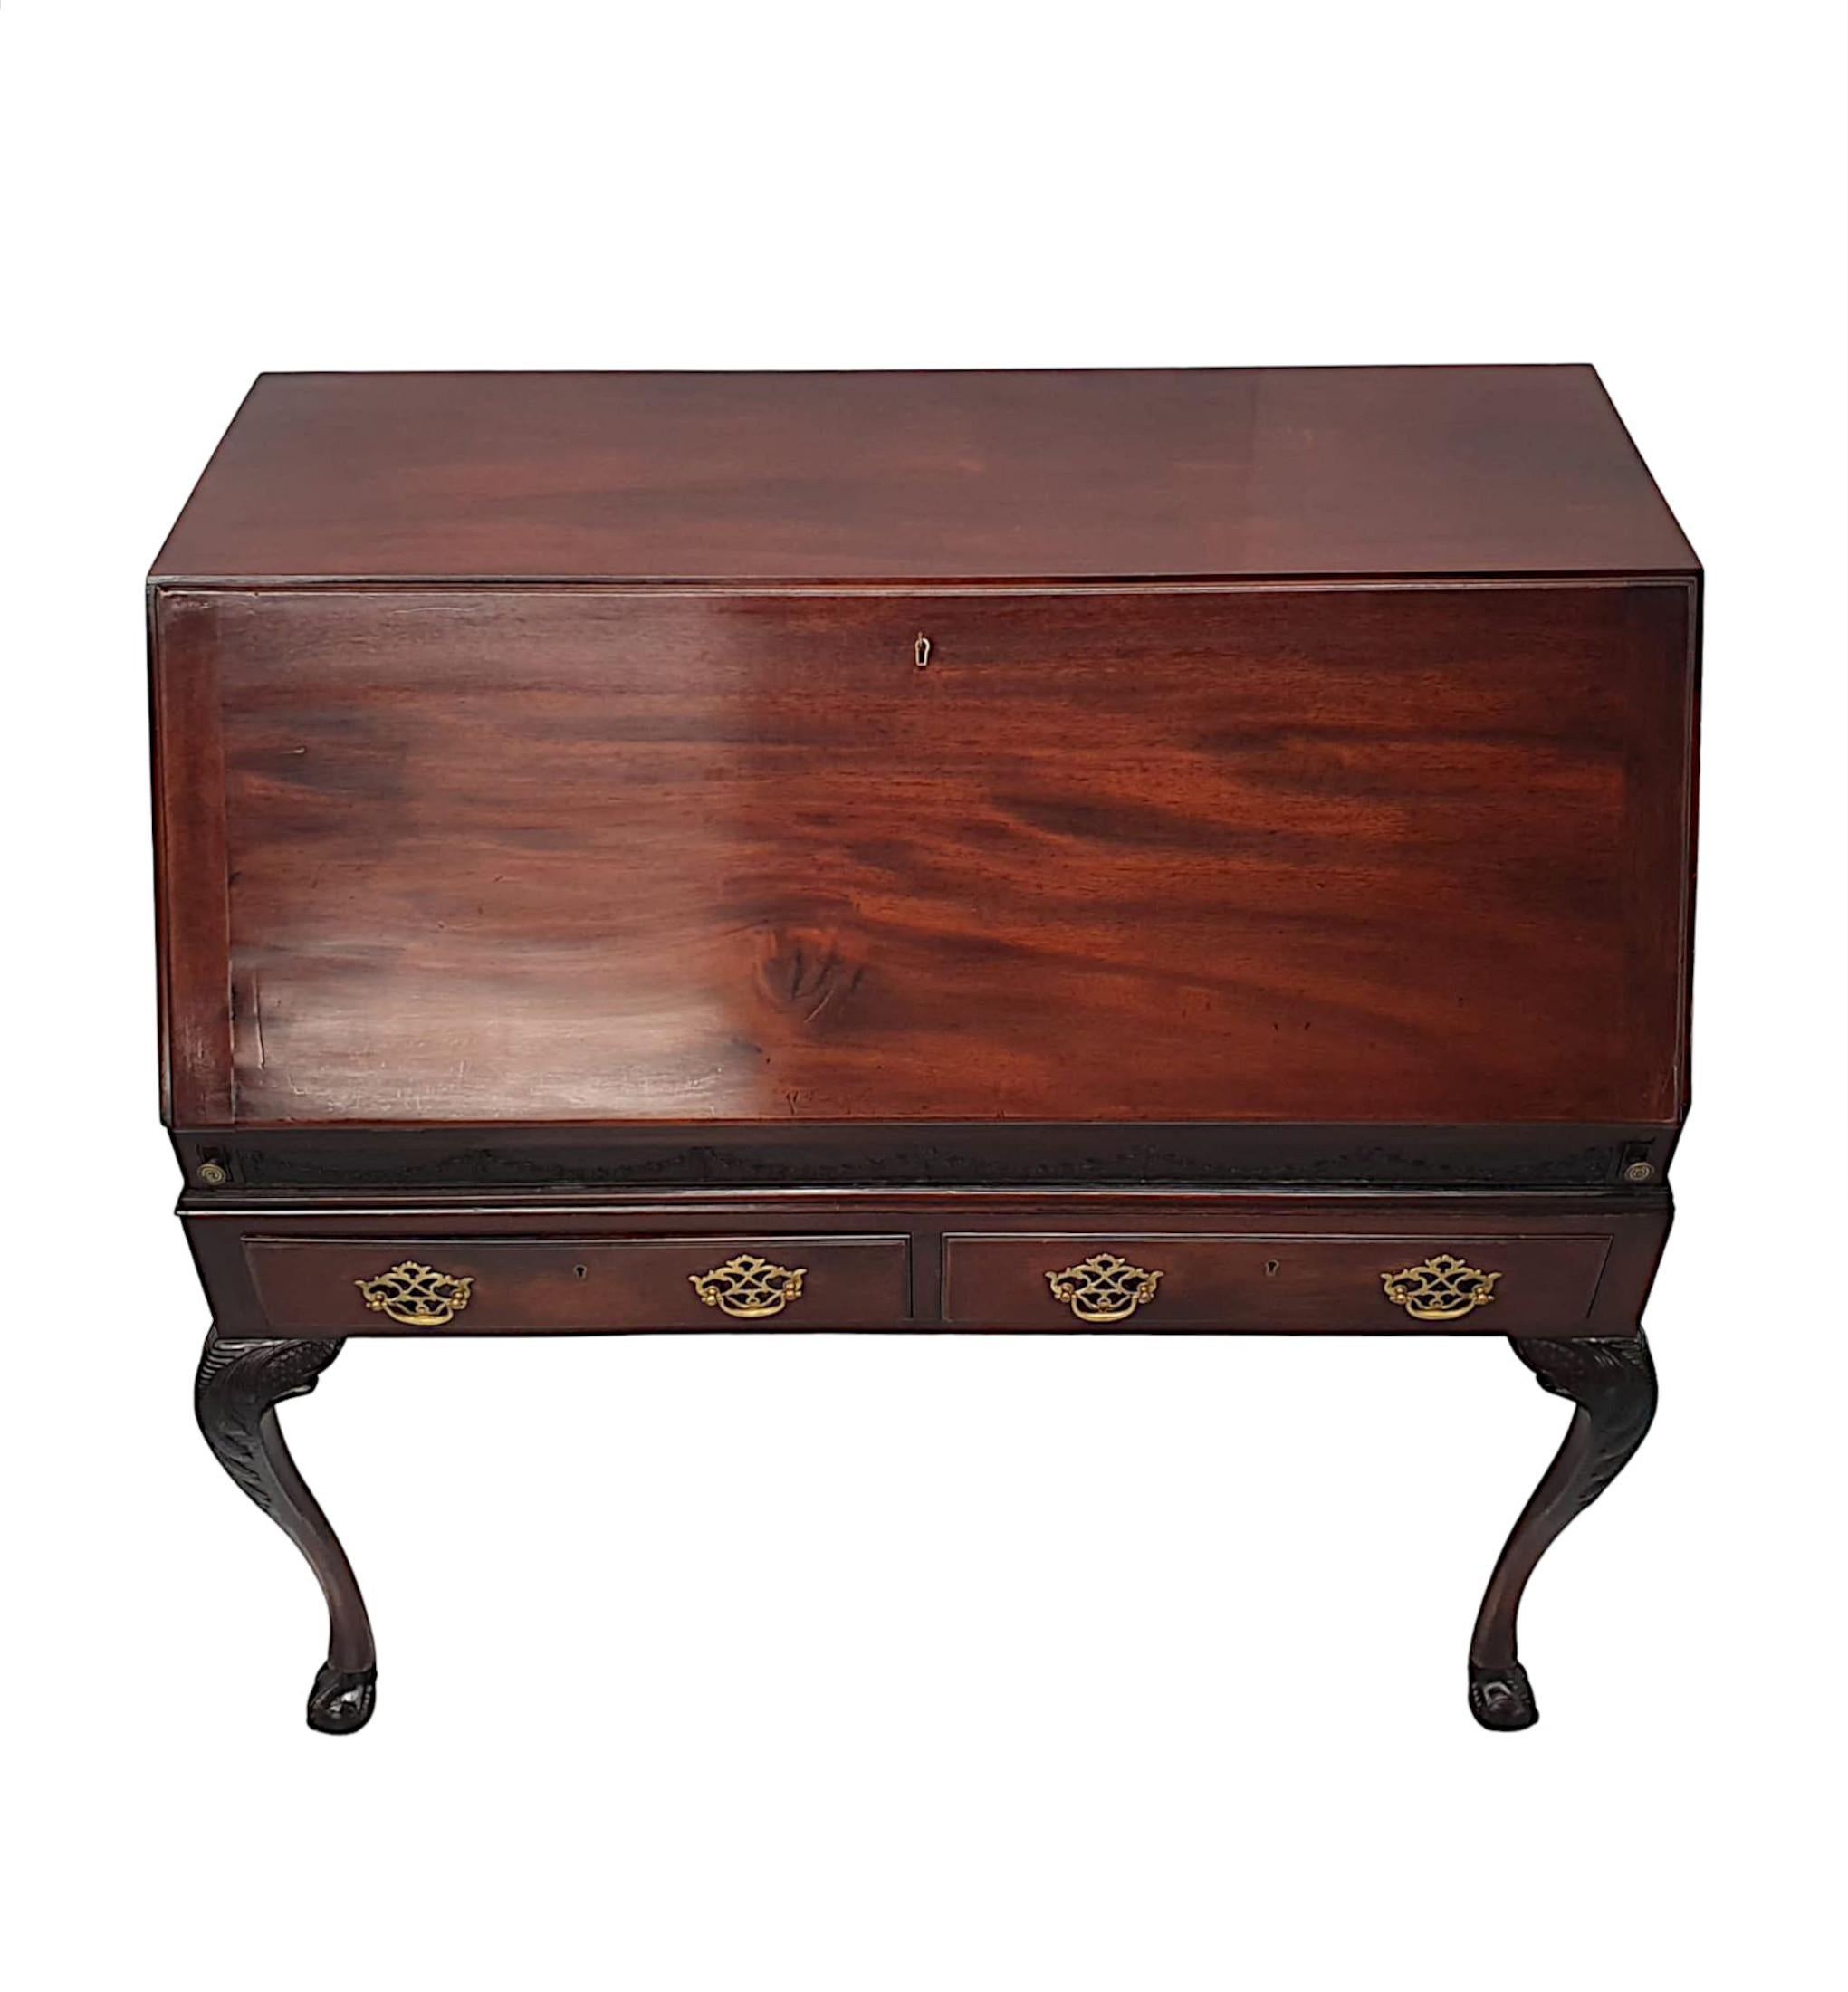 An Exceptional 19th Century Irish Fall Front Bureau by Butlers of Dublin For Sale 1